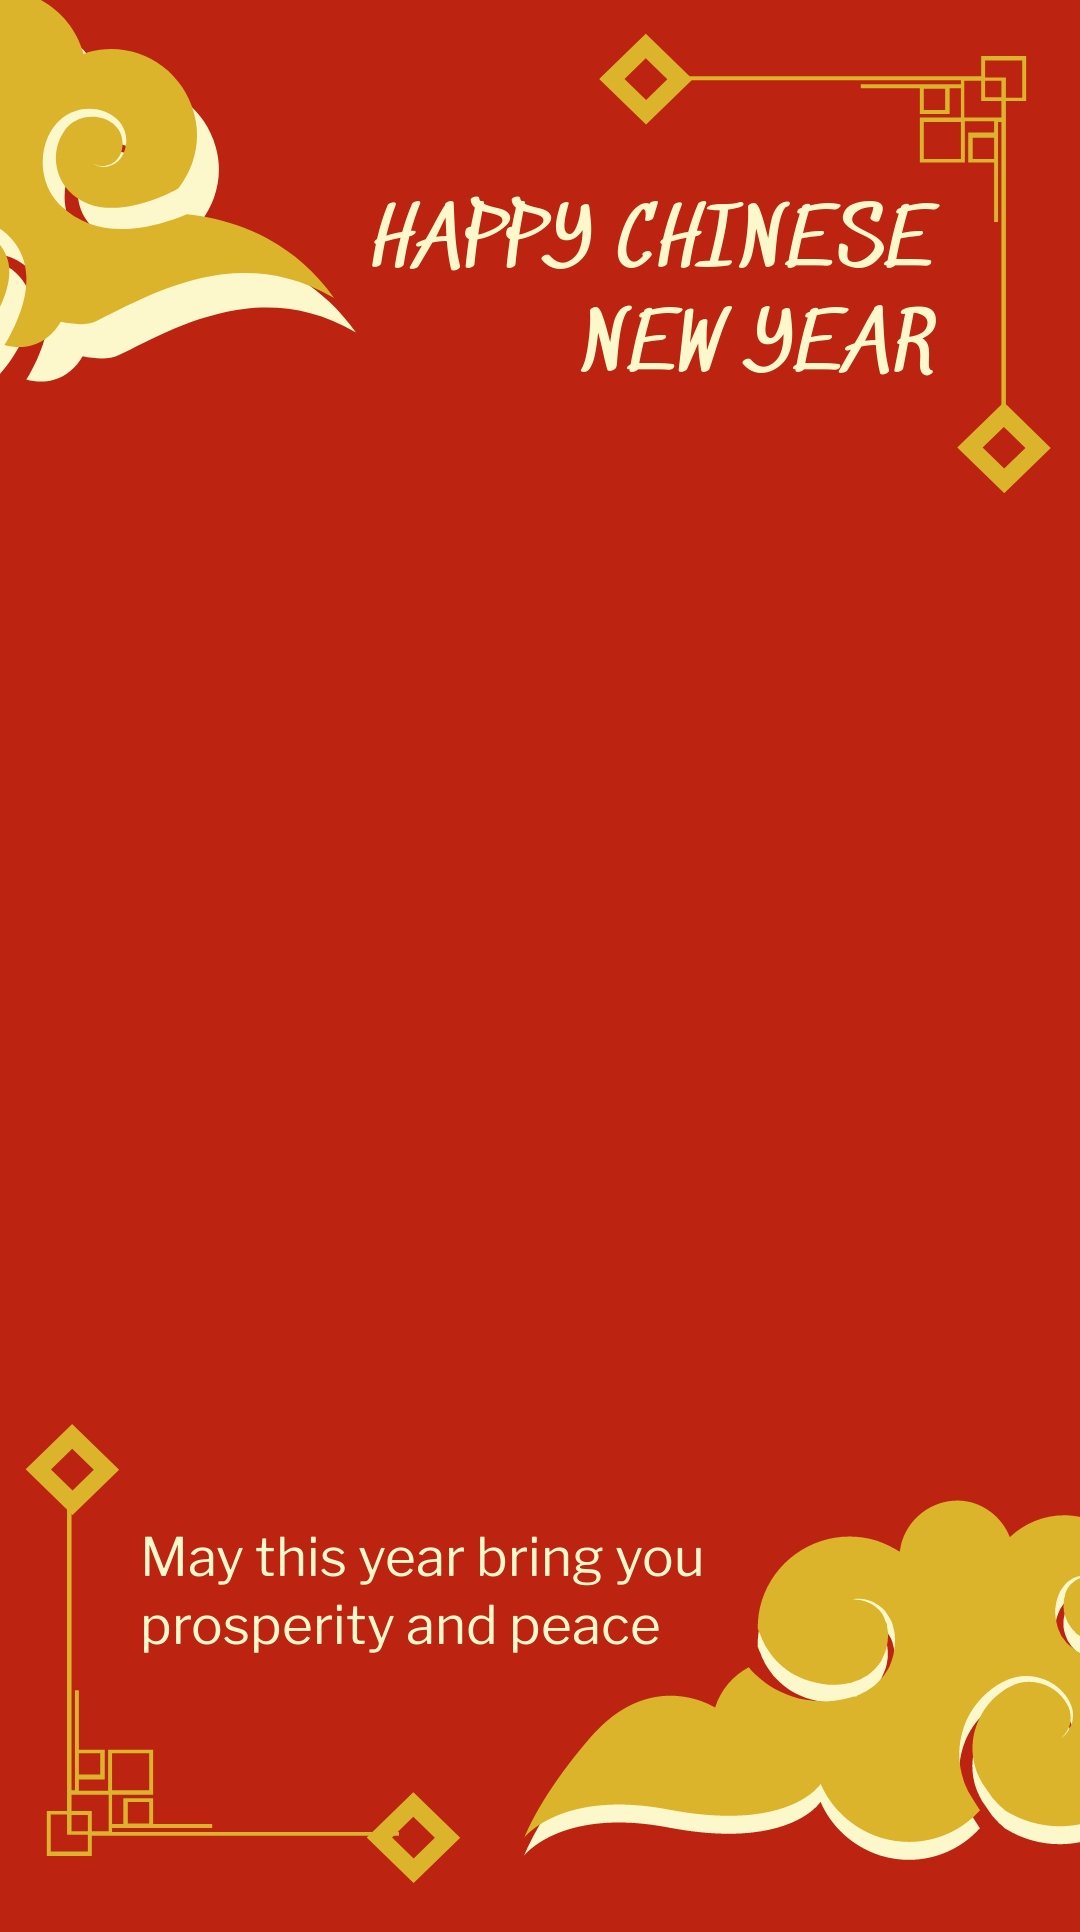 Vintage Chinese New Year Snapchat Geofilter Template.jpe